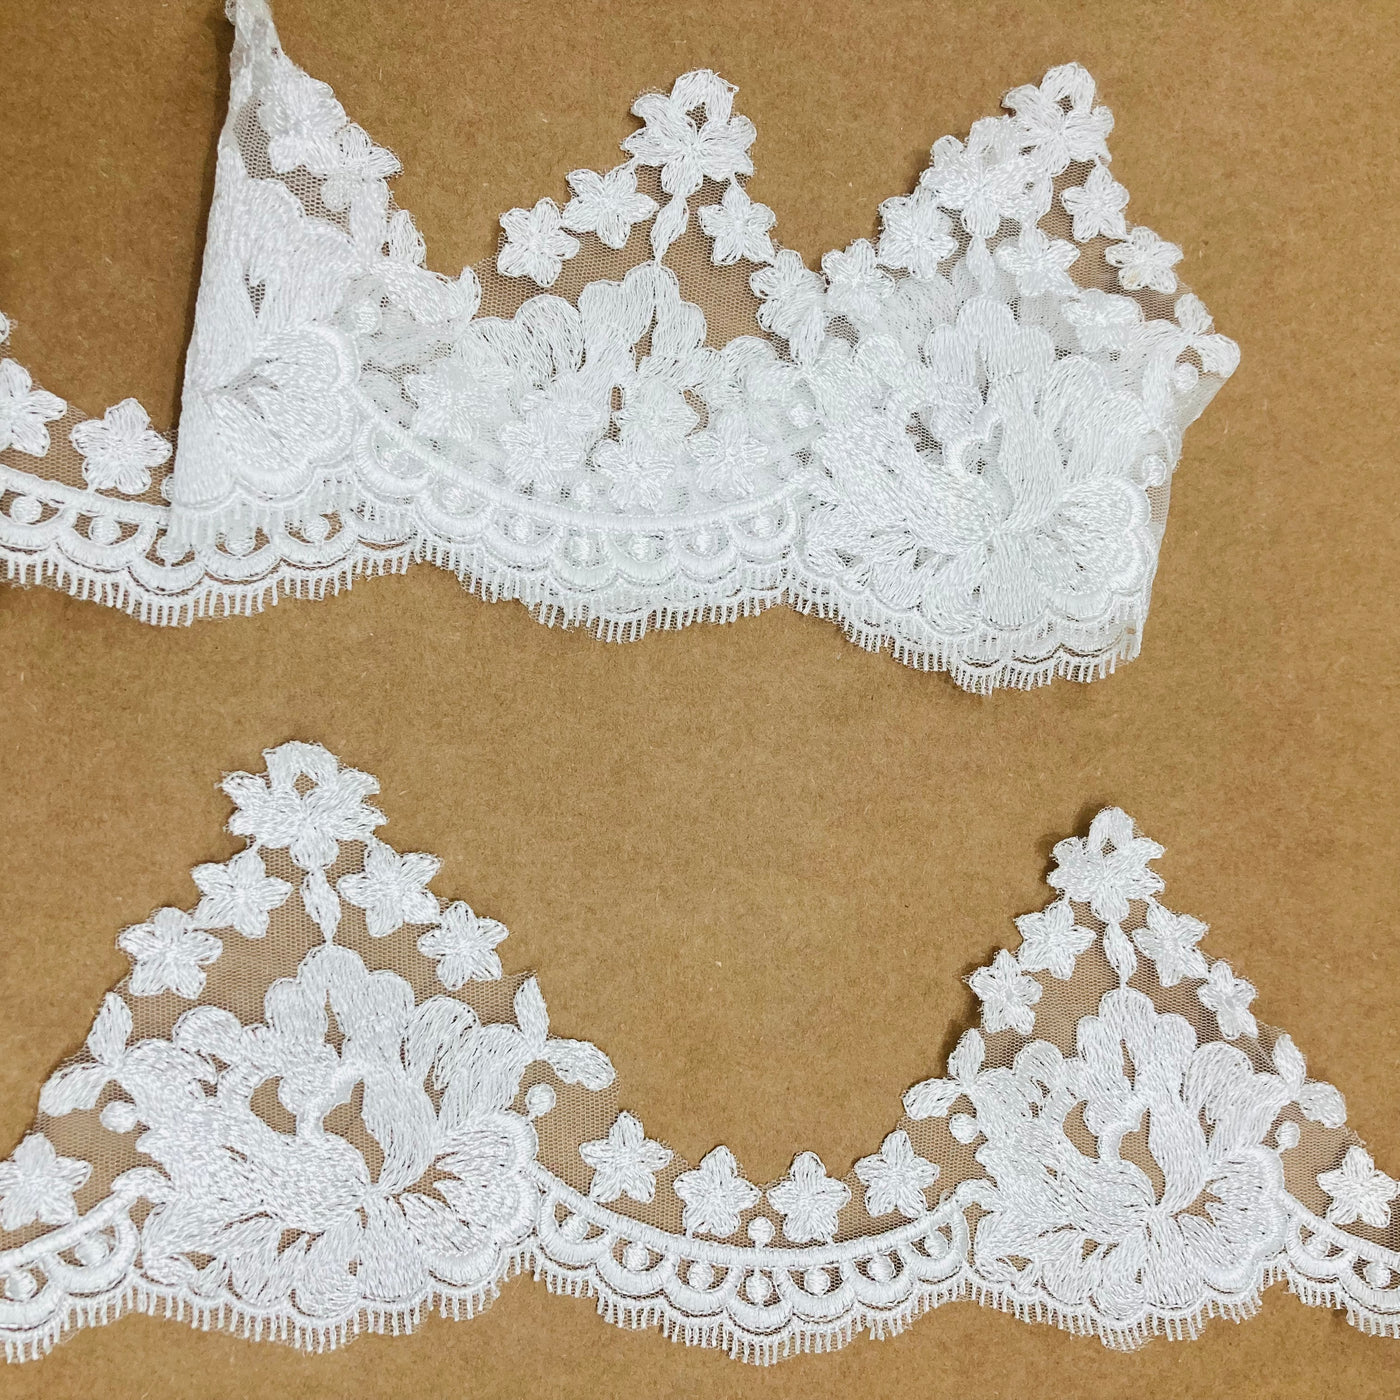 Floral Lace Trimming Embroidered on 100% Polyester Net Mesh | Lace USA - 21842W